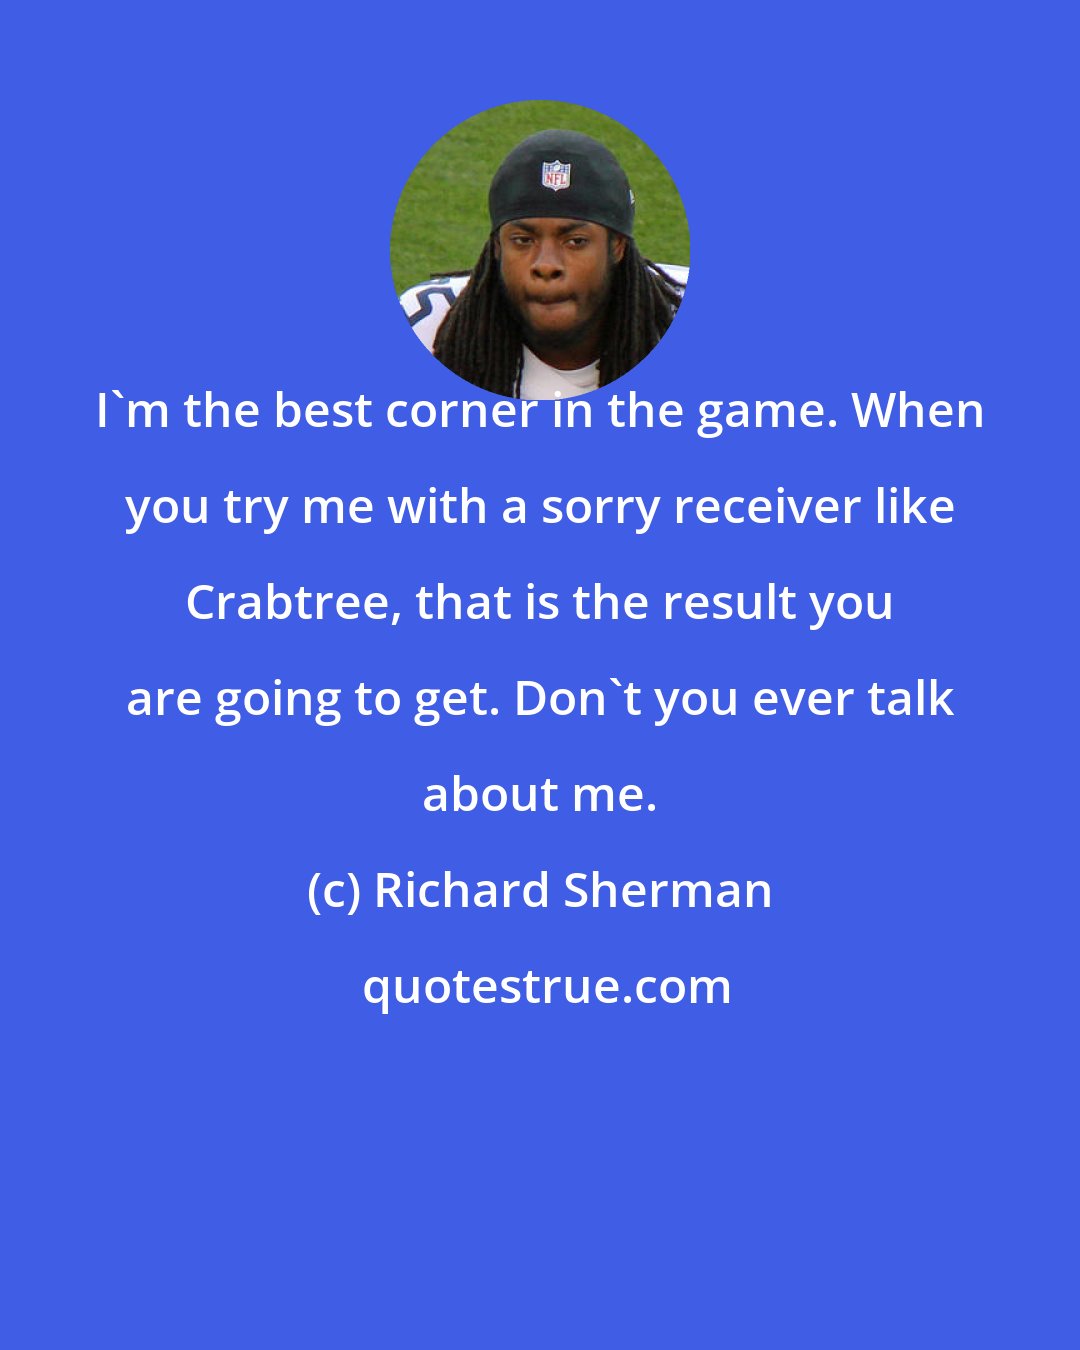 Richard Sherman: I'm the best corner in the game. When you try me with a sorry receiver like Crabtree, that is the result you are going to get. Don't you ever talk about me.